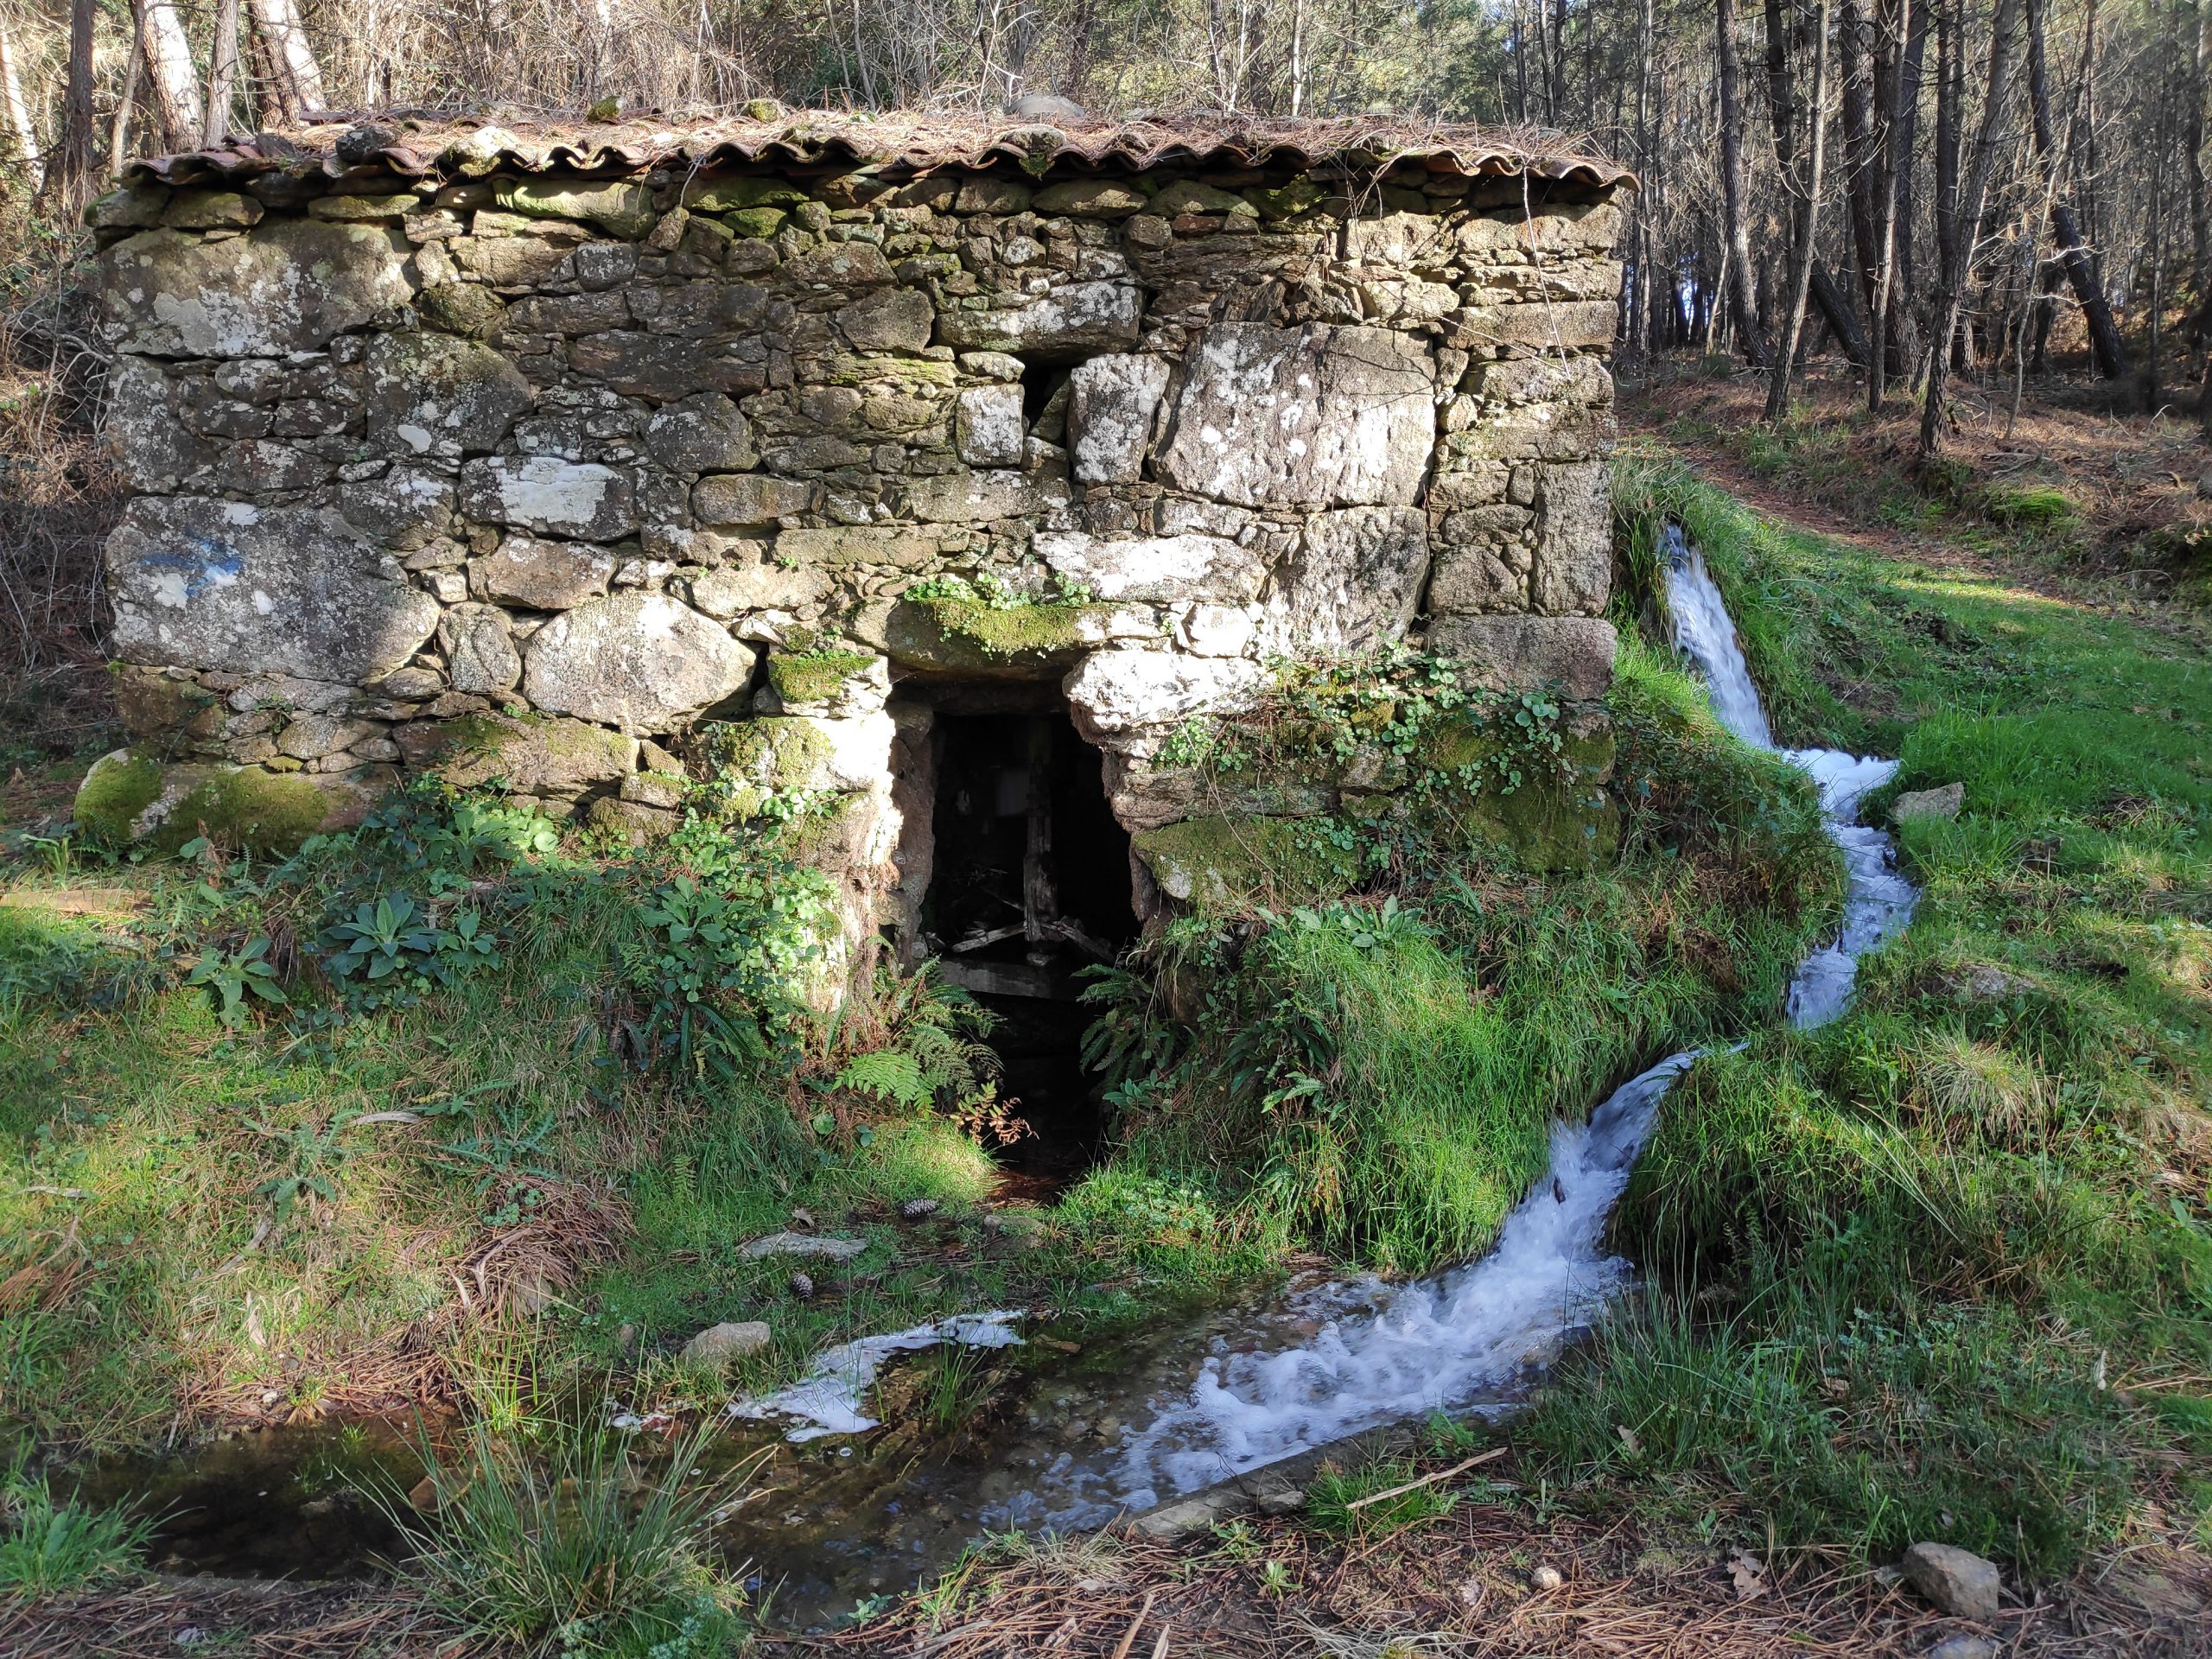 Old ruin, or mill.